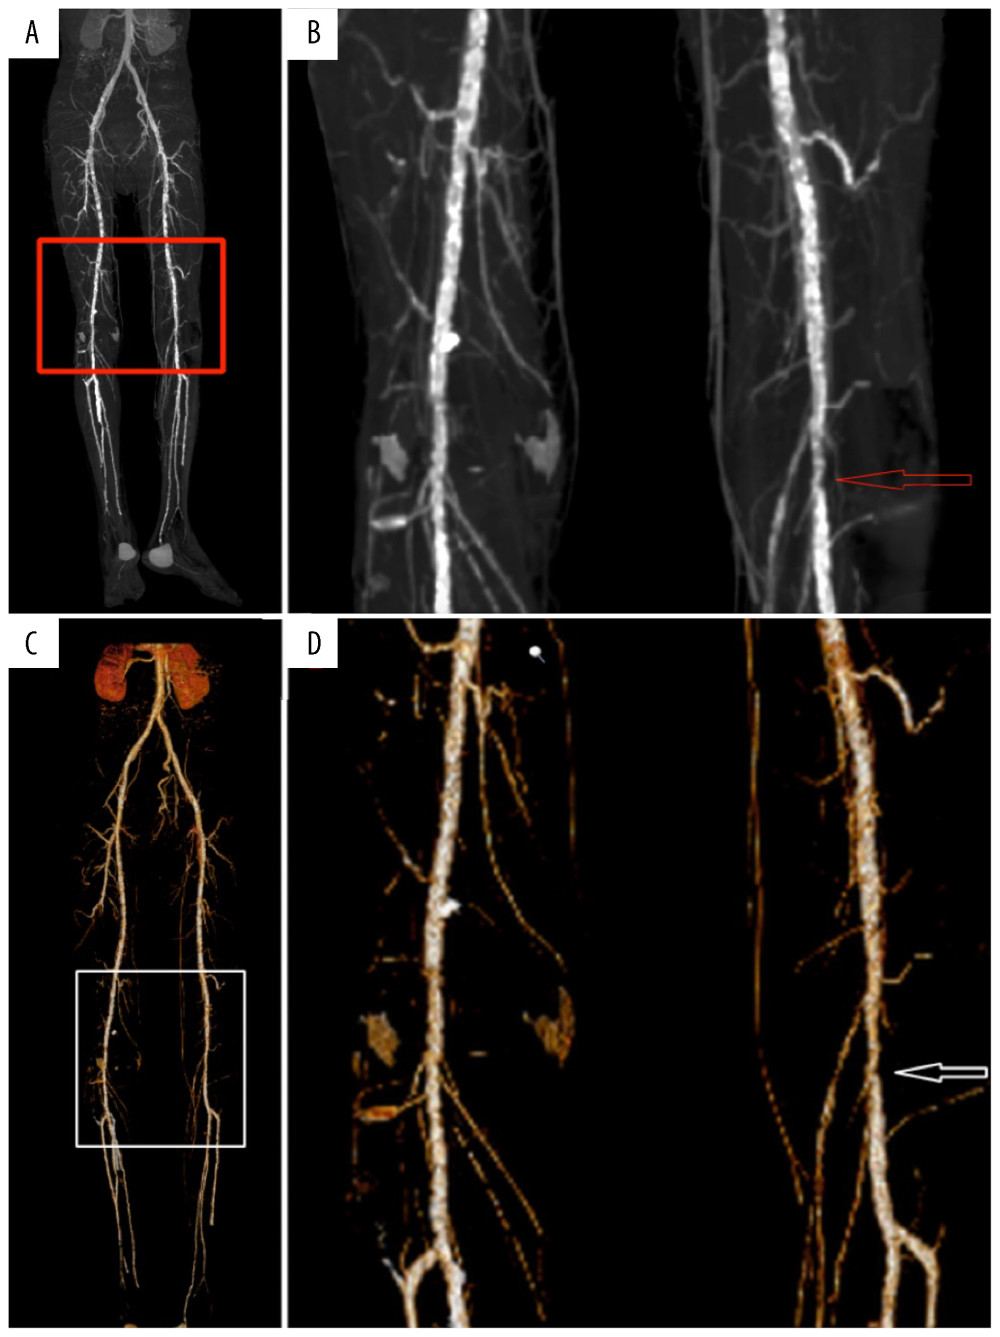 CT angiography of the abdominal aorta and lower limbs on admission showing the heavy calcifications of the arteries, which appear as hyperdense white areas. (A) CT angiography MIP (maximum intensity projection). (B) Magnification and focus on the popliteal area of the MIP image. (C) CT angiography VIP (volume intensity projection). (D) Magnification and focus on the popliteal area of the VIP image. The arrows in (B, D) point to the site of severe stenosis in the popliteal artery.